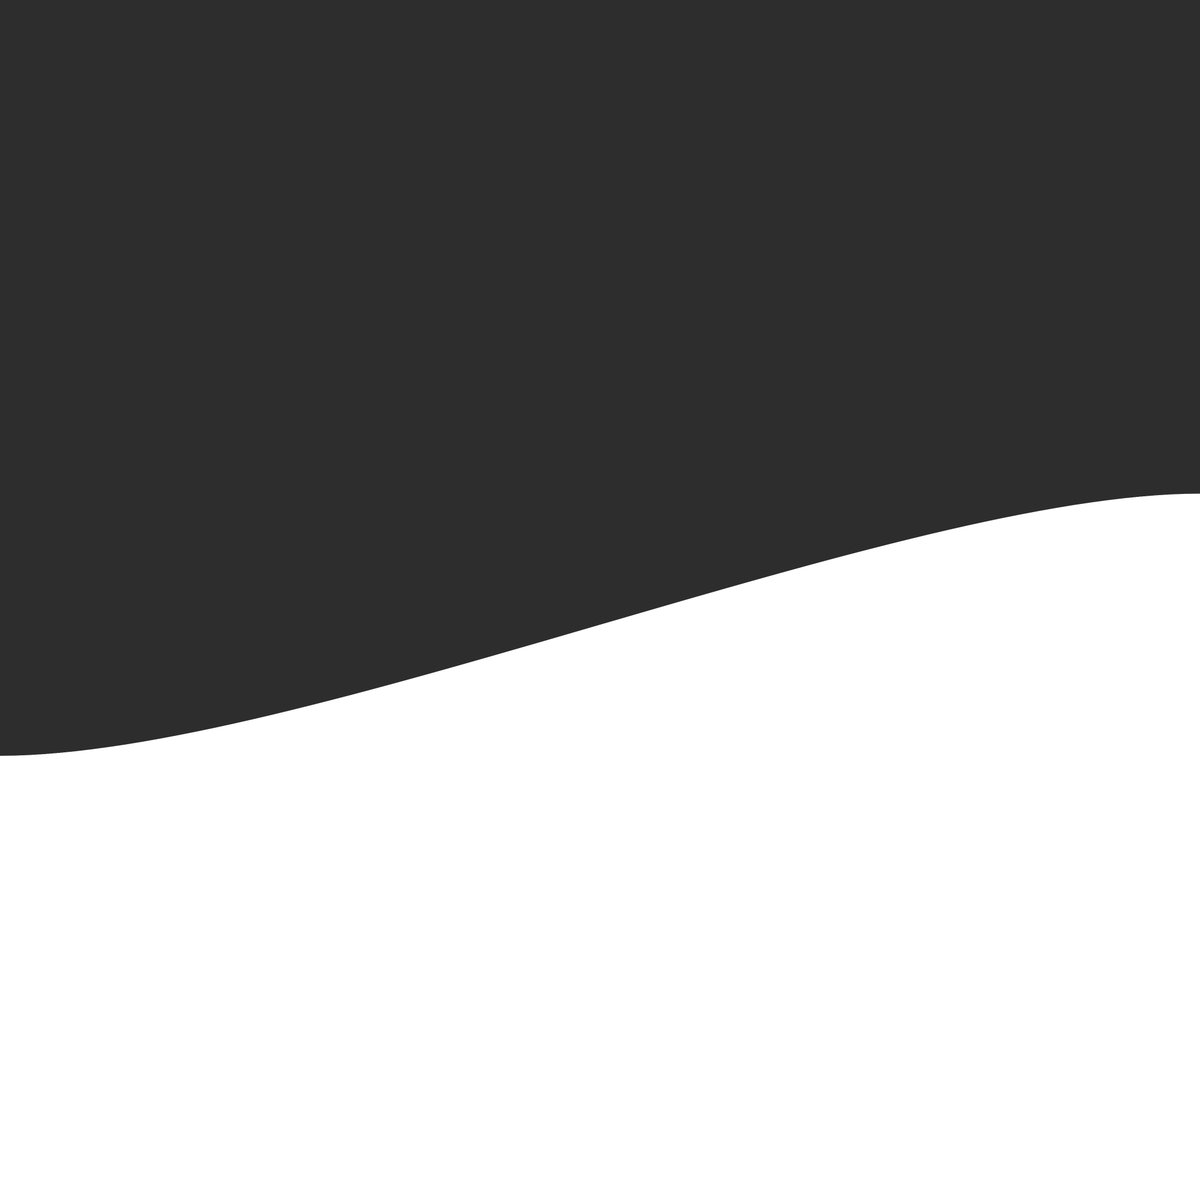 A little tribute piece to Ellsworth Kelly, White Curve. #madewithcode #genartclub